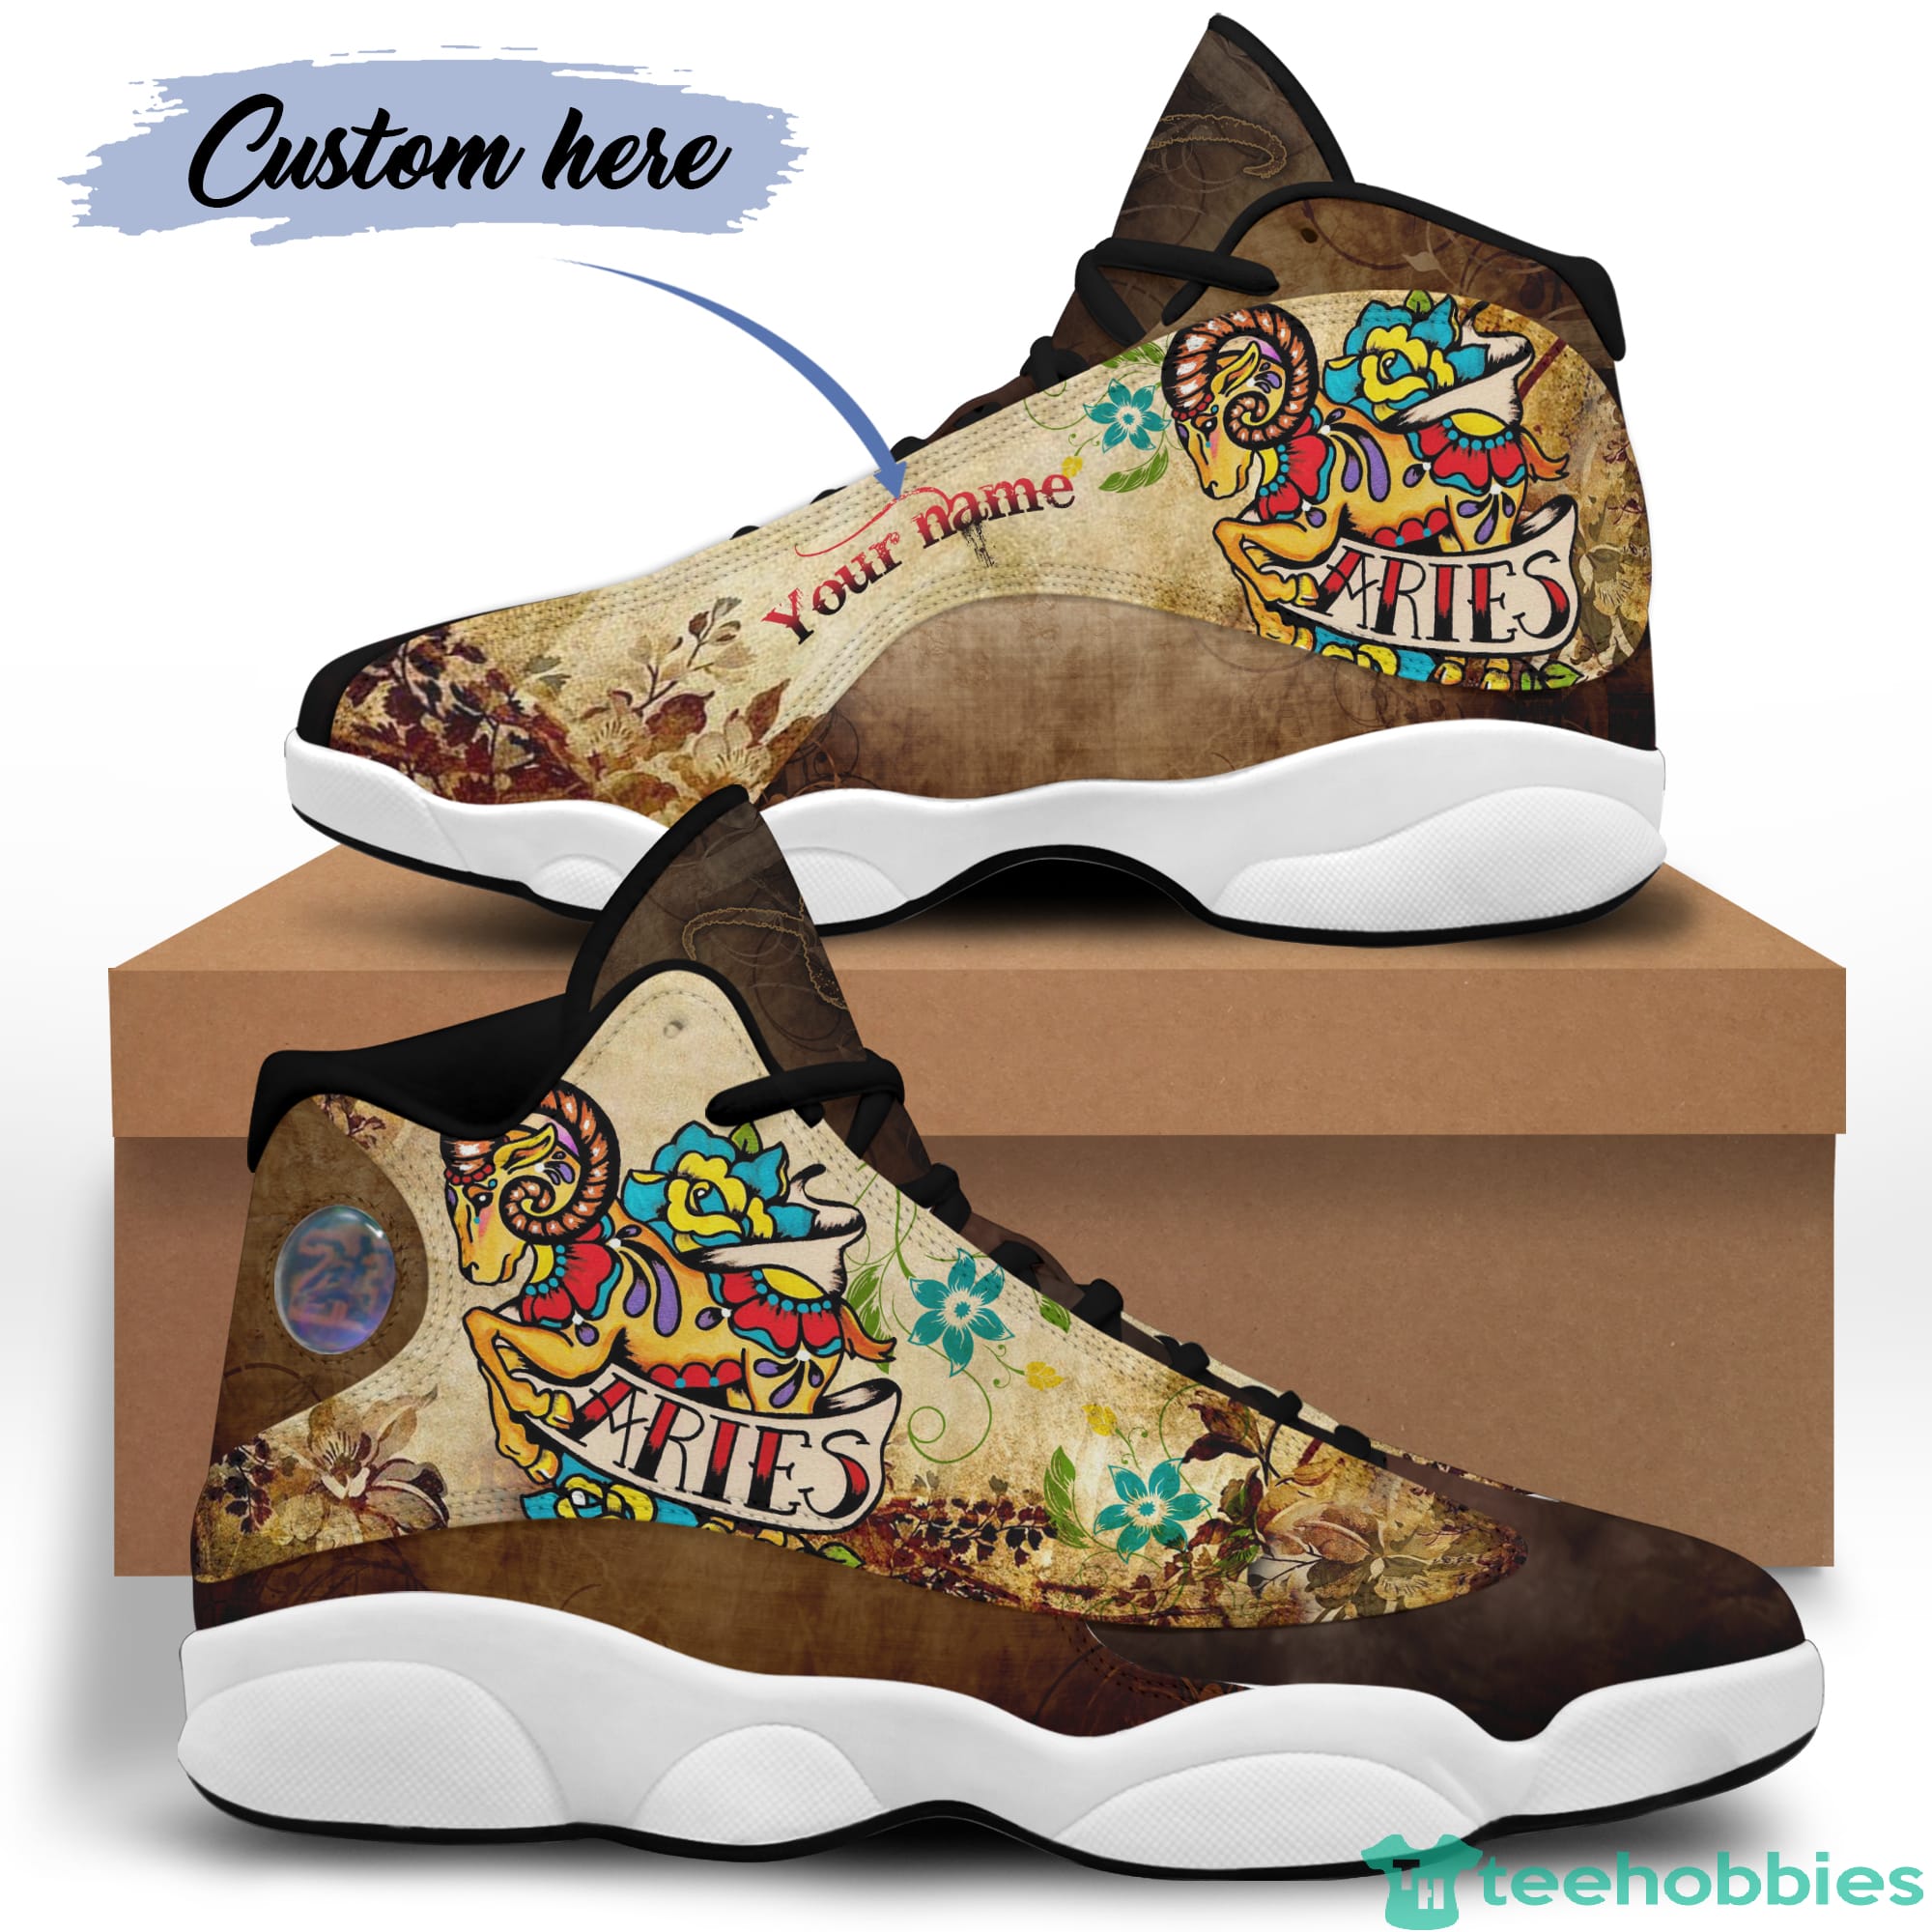 Aries Birthday Gift Personalized Name Personalized Name Air Jordan 13 Shoes SKU-88